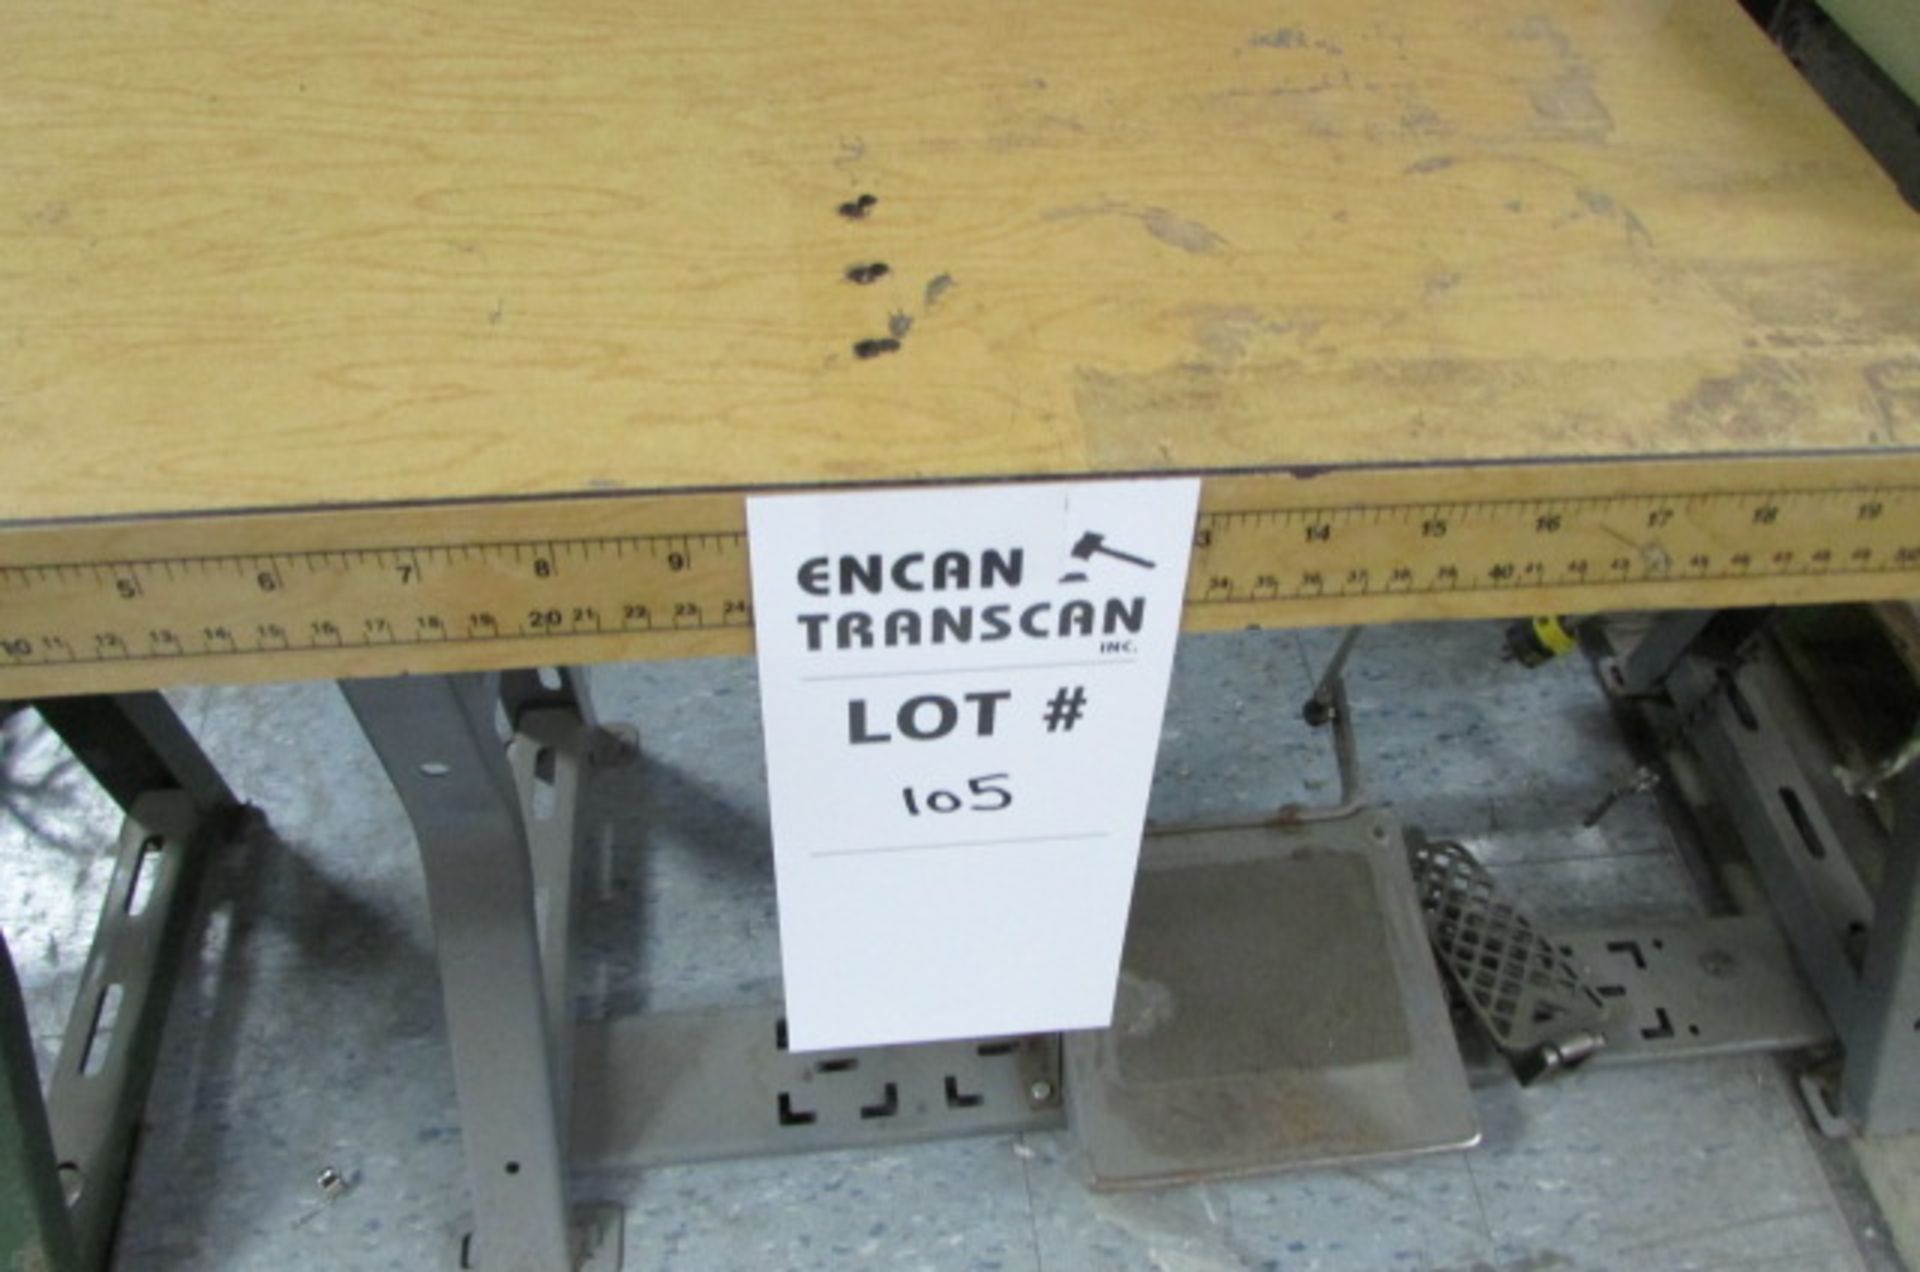 "UNION SPECIAL SEWING MACHINE MODEL 39500GD